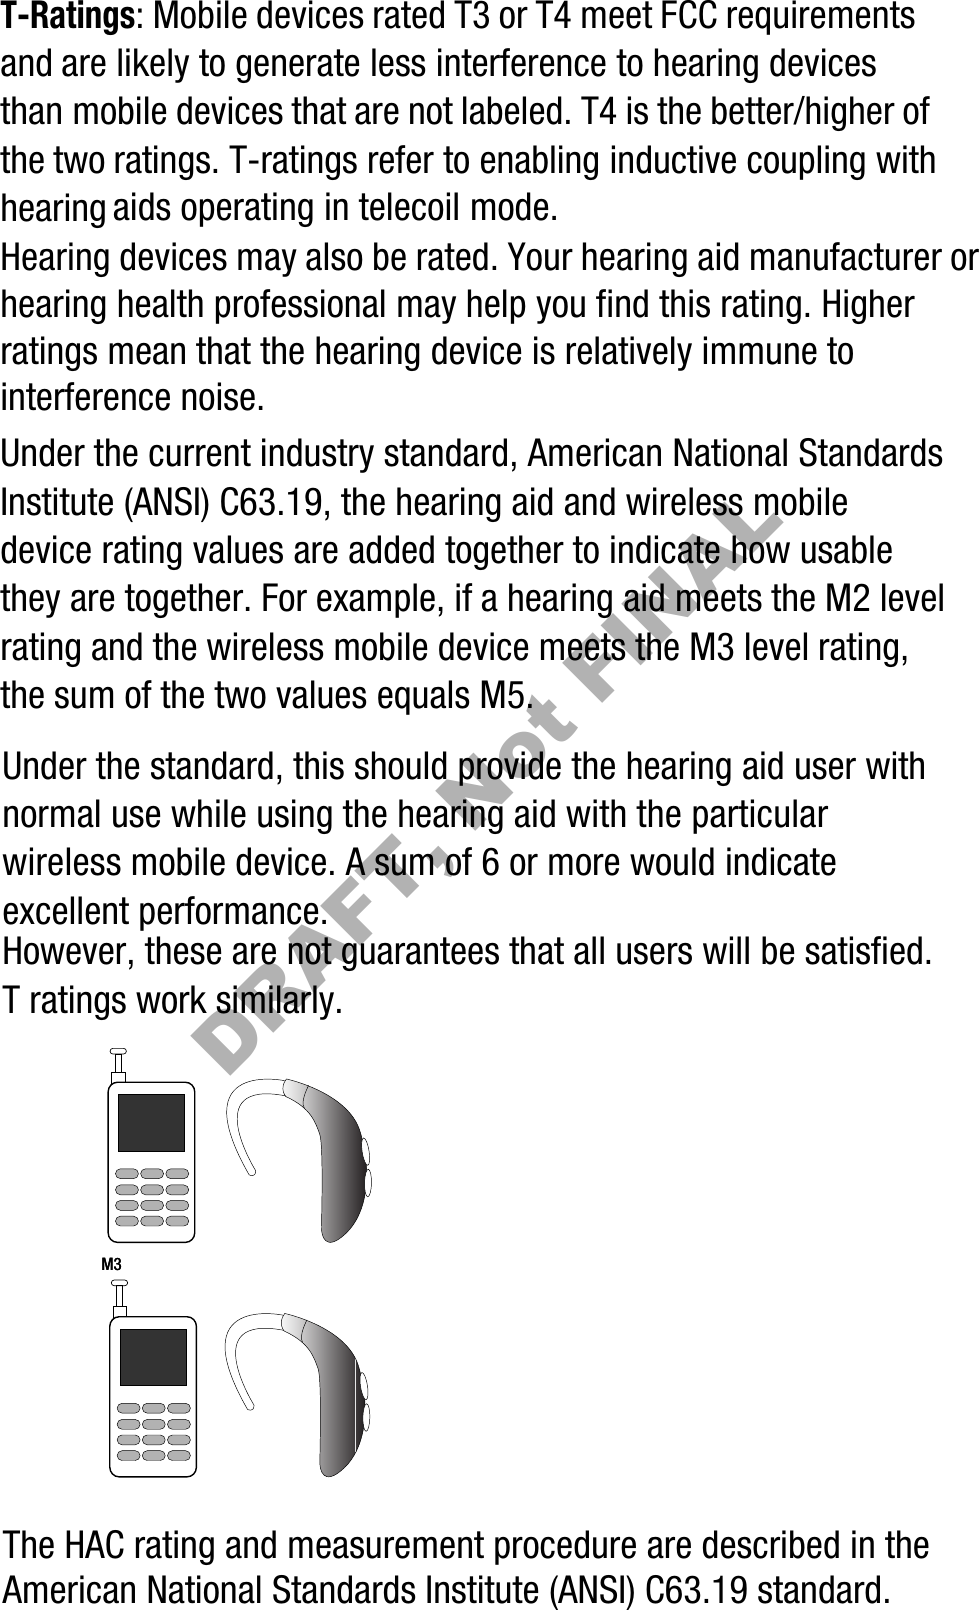 T-Ratings: Mobile devices rated T3 or T4 meet FCC requirements and are likely to generate less interference to hearing devices than mobile devices that are not labeled. T4 is the better/higher of the two ratings. T-ratings refer to enabling inductive coupling with hearing aids operating in telecoil mode.Hearing devices may also be rated. Your hearing aid manufacturer or hearing health professional may help you find this rating. Higher ratings mean that the hearing device is relatively immune to interference noise. Under the current industry standard, American National Standards Institute (ANSI) C63.19, the hearing aid and wireless mobile device rating values are added together to indicate how usable they are together. For example, if a hearing aid meets the M2 level rating and the wireless mobile device meets the M3 level rating, the sum of the two values equals M5. Under the standard, this should provide the hearing aid user with normal use while using the hearing aid with the particular wireless mobile device. A sum of 6 or more would indicate excellent performance.  However, these are not guarantees that all users will be satisfied. T ratings work similarly.The HAC rating and measurement procedure are described in the American National Standards Institute (ANSI) C63.19 standard.M3       M3DRAFT, Not FINAL